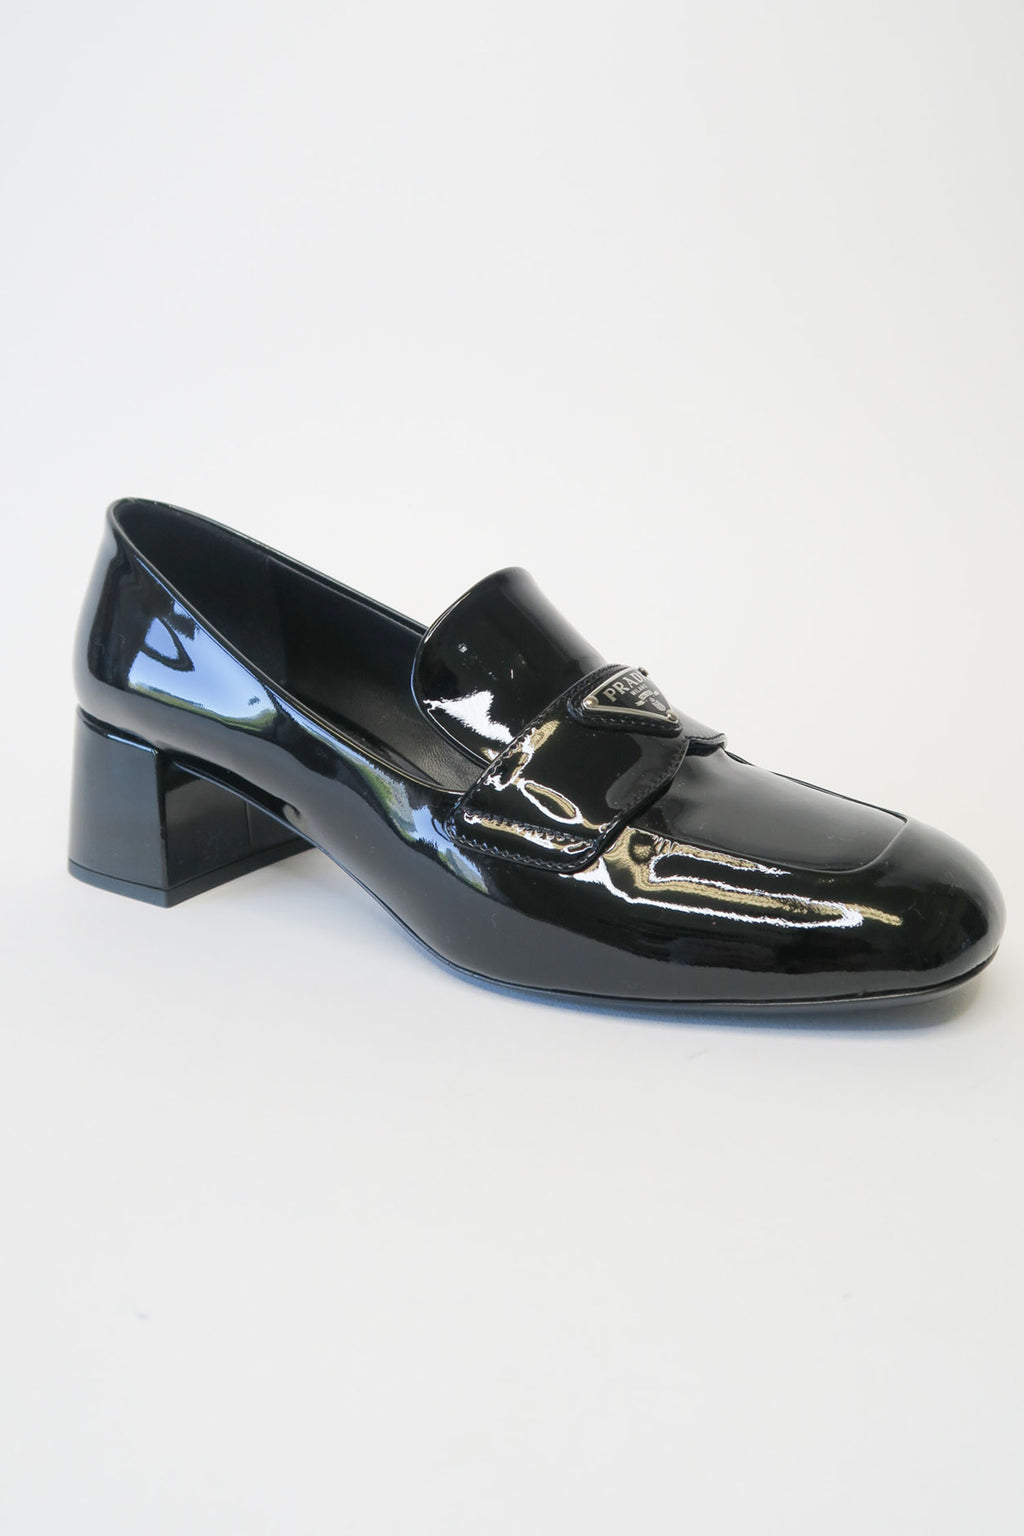 Prada Patent Leather Accents Loafers sz 38